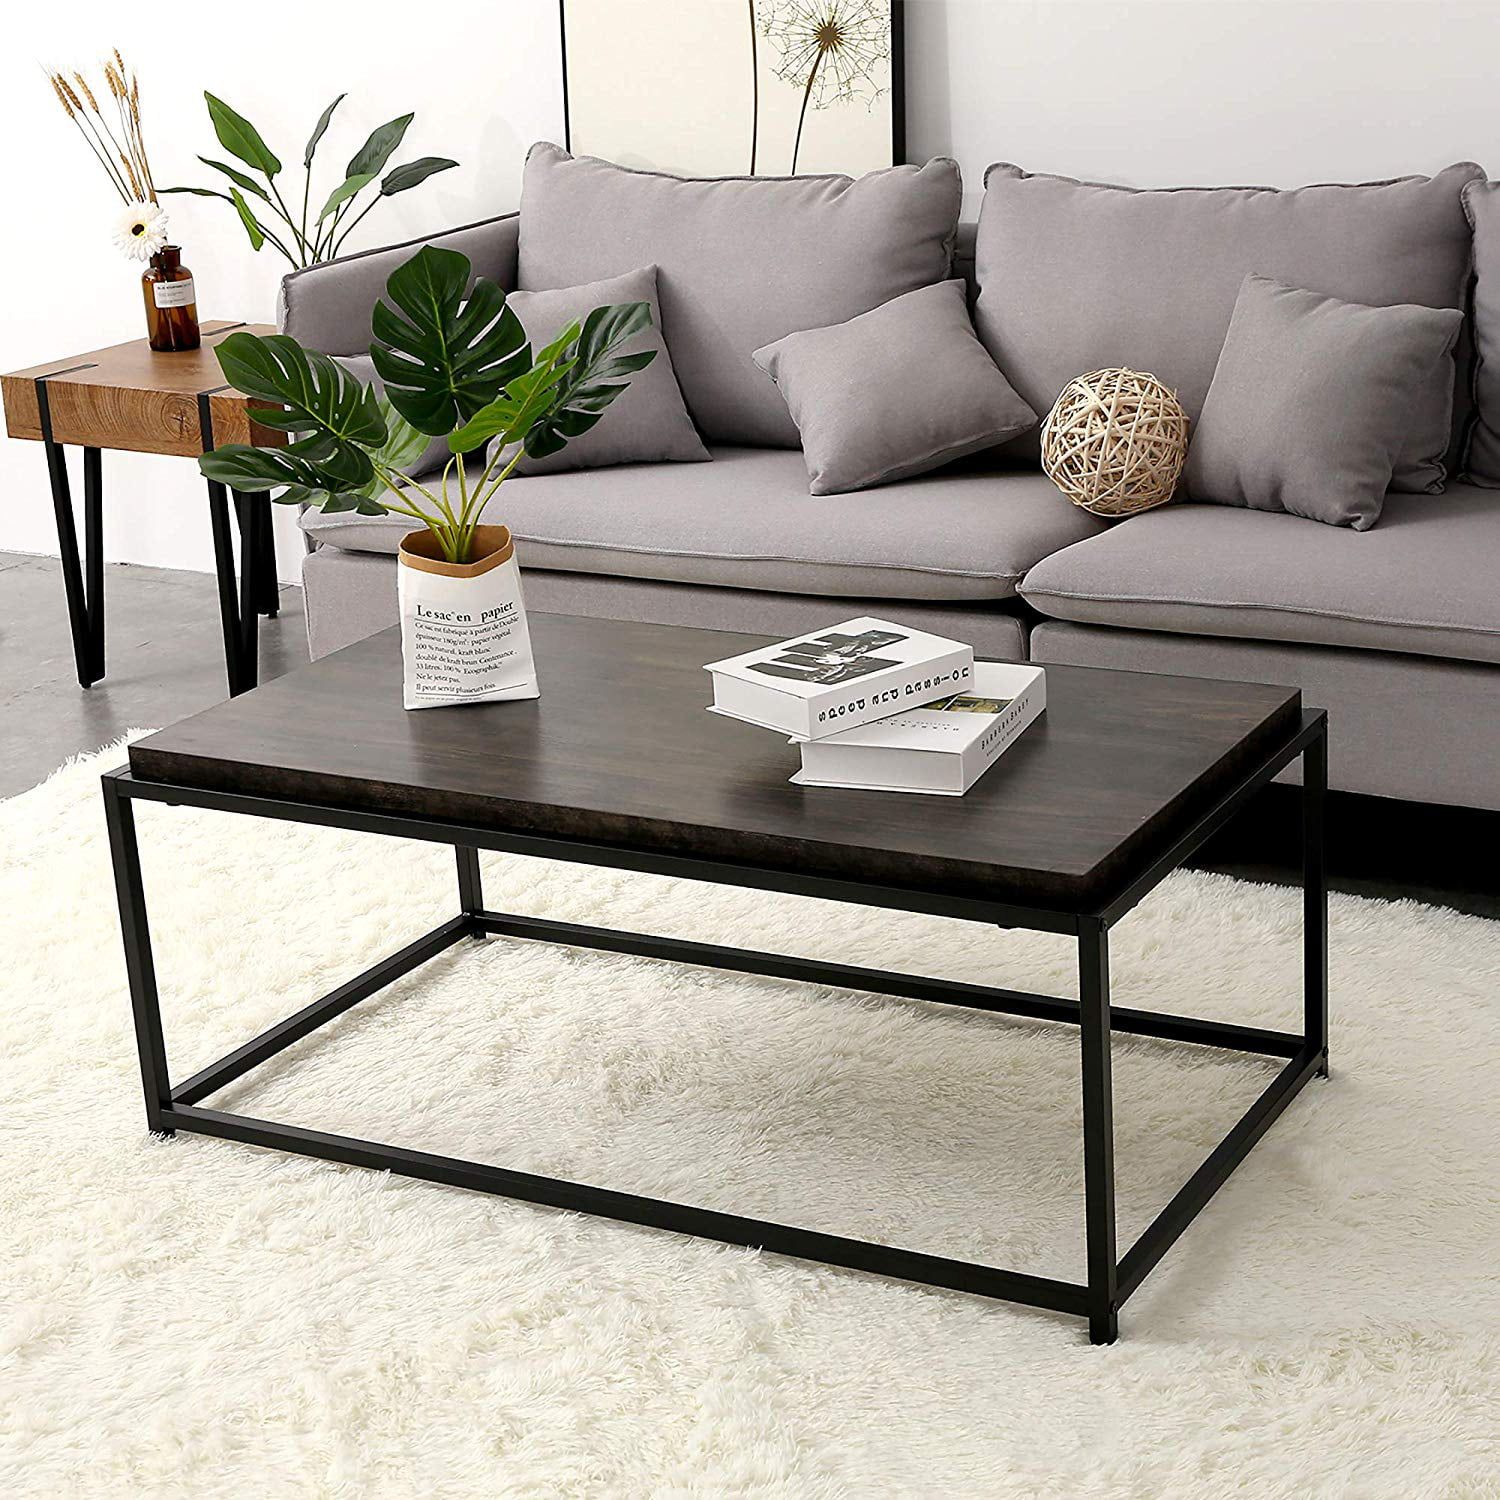 Ivinta Wood Coffee Table Modern Industrial Space Saving Couch Living Within Espresso Wood Finish Coffee Tables (View 14 of 15)